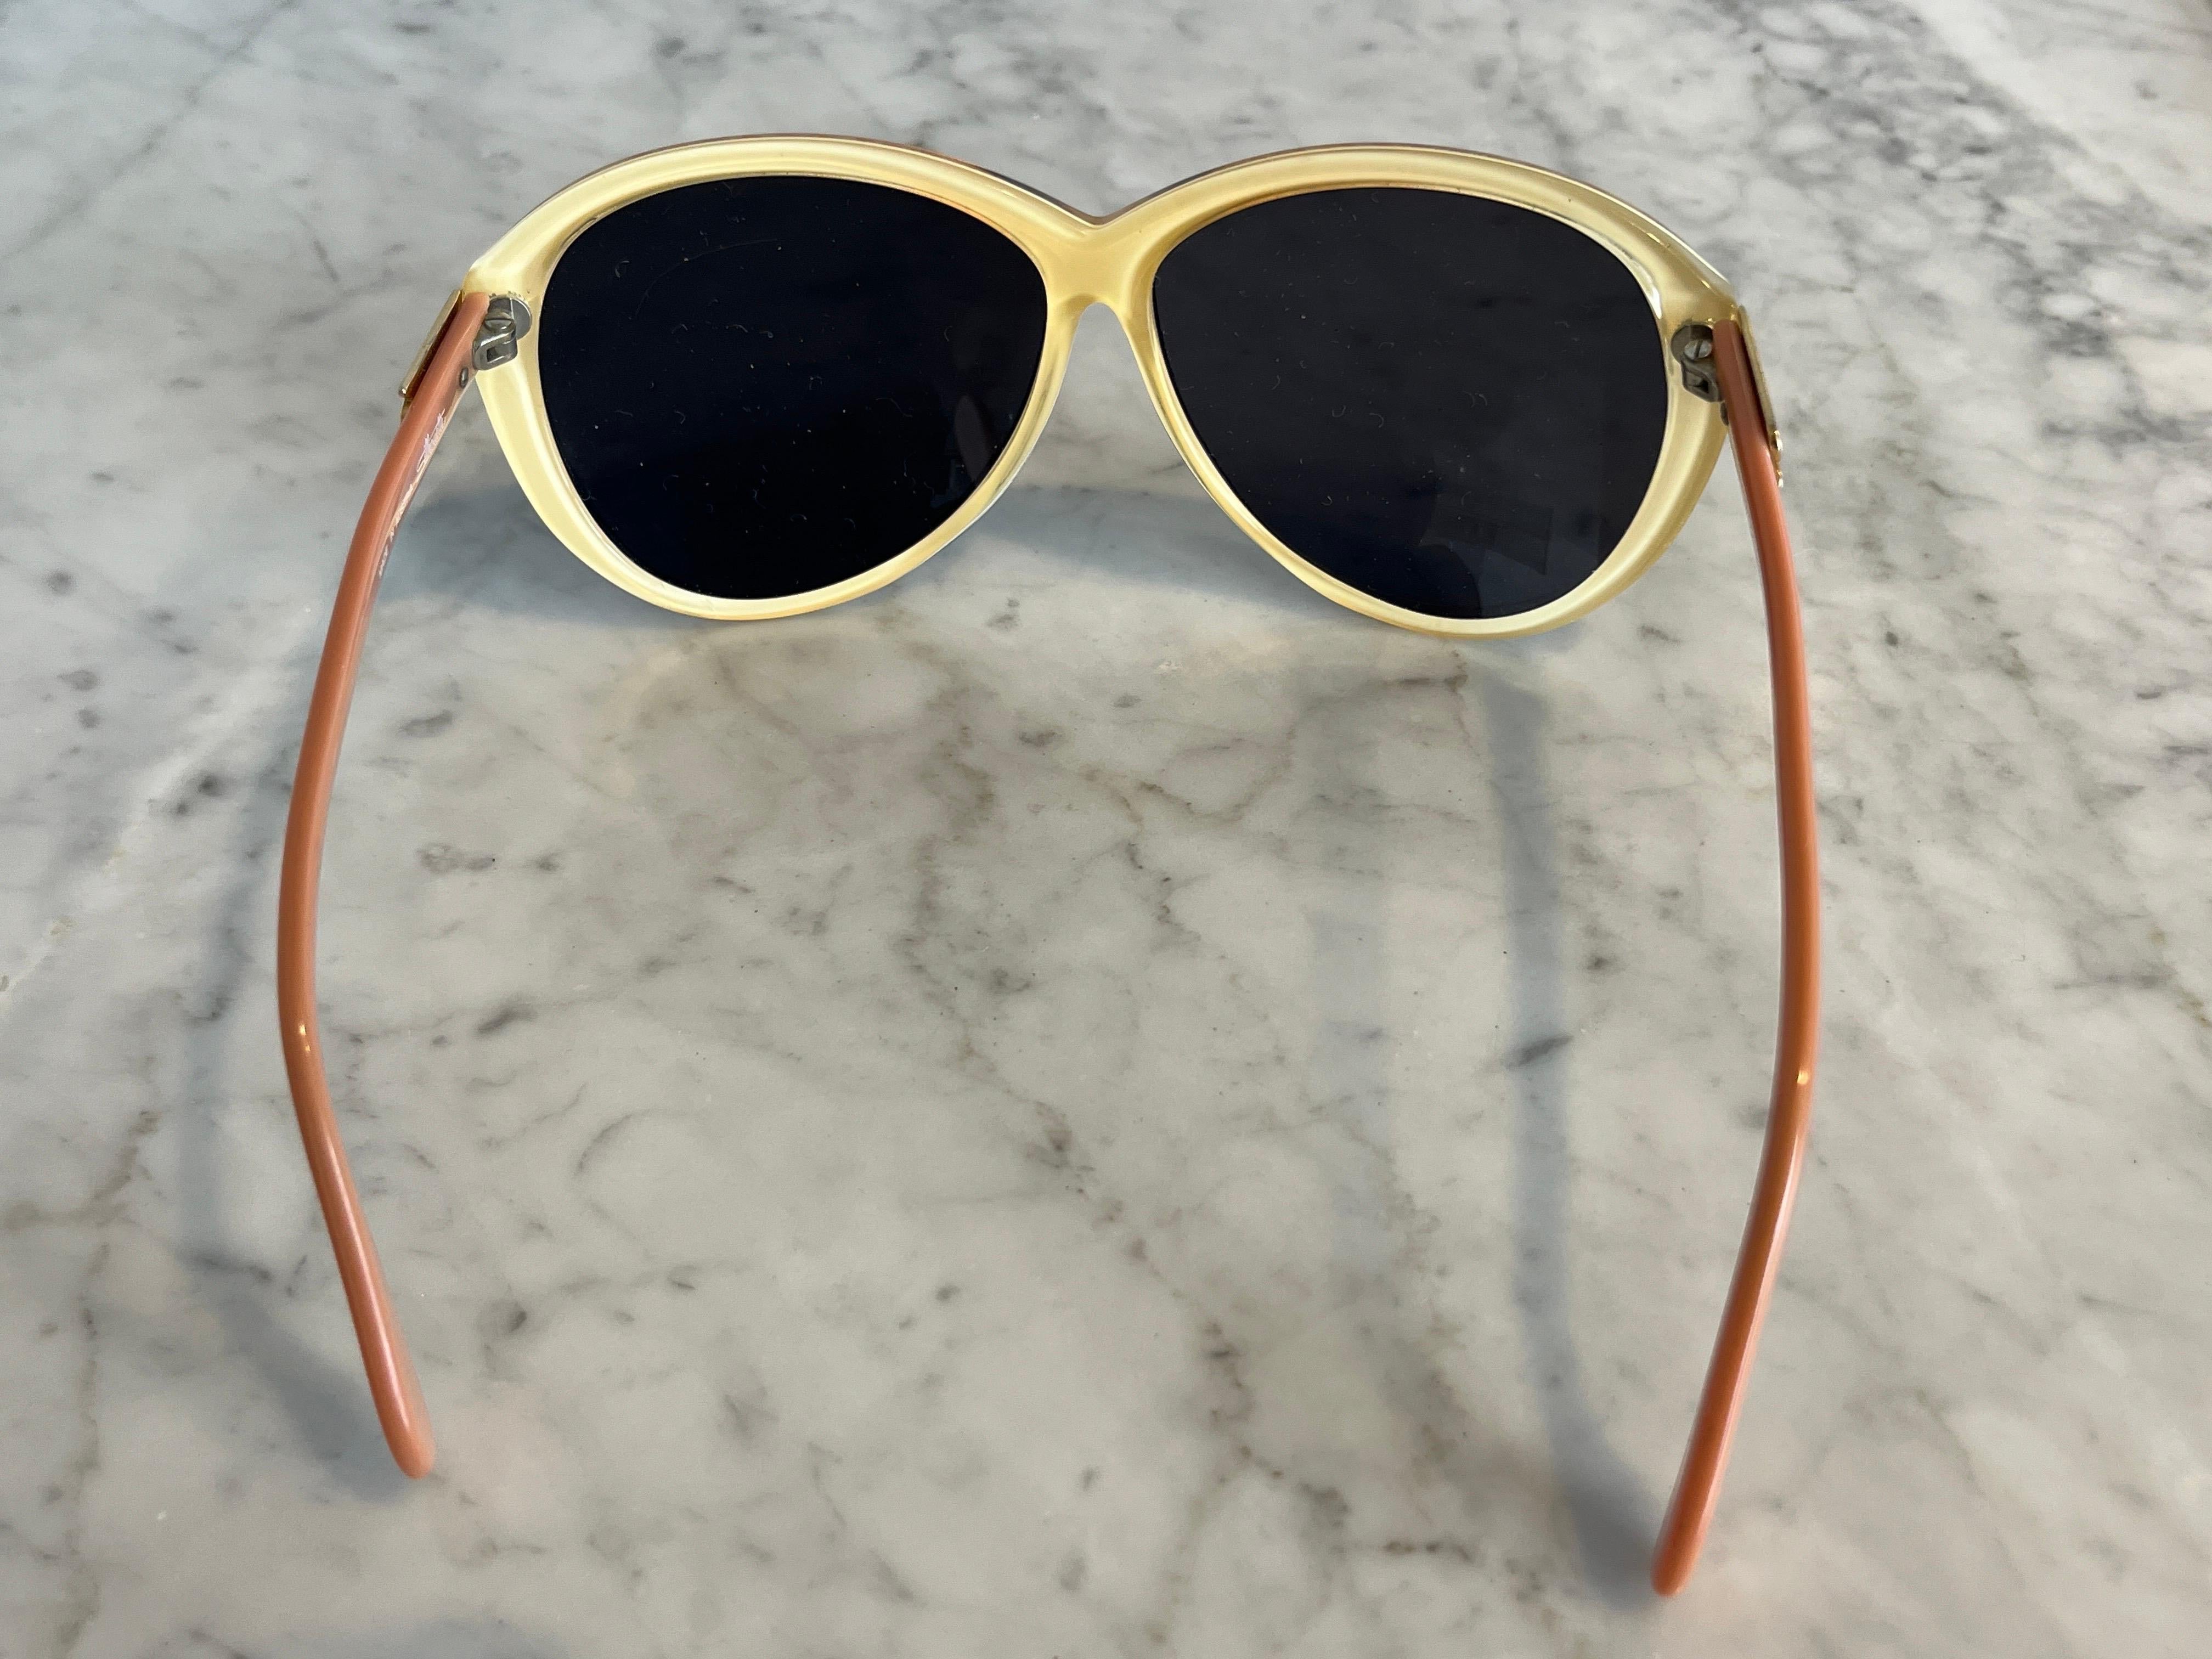 Women's Vintage 1980’s 2 tone apricot sunglasses by Silhouette For Sale